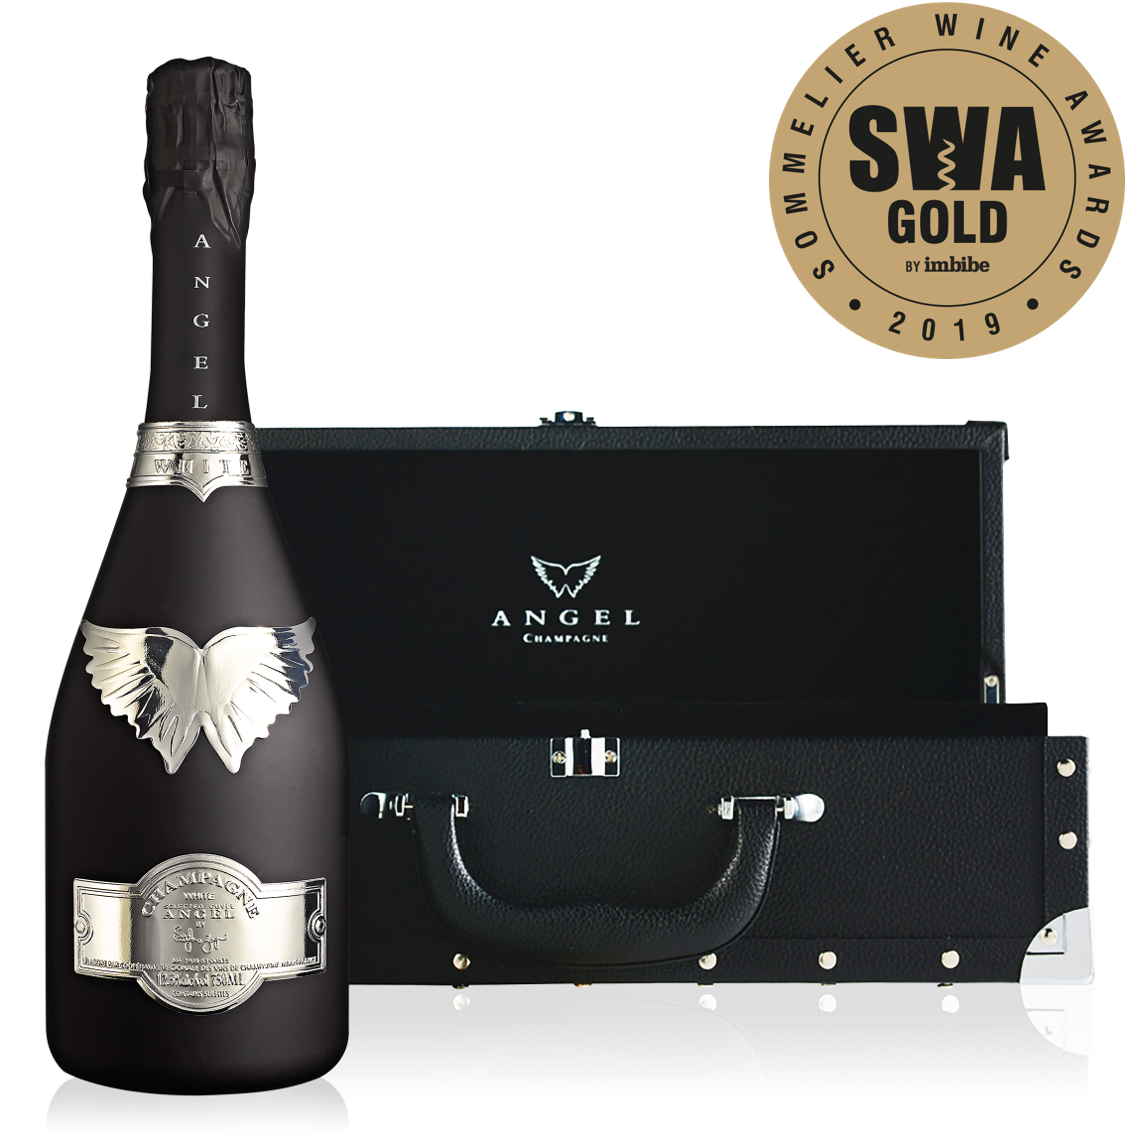 Luxury champagne “ANGEL CHAMPAGNE” is the world's first! Champagne